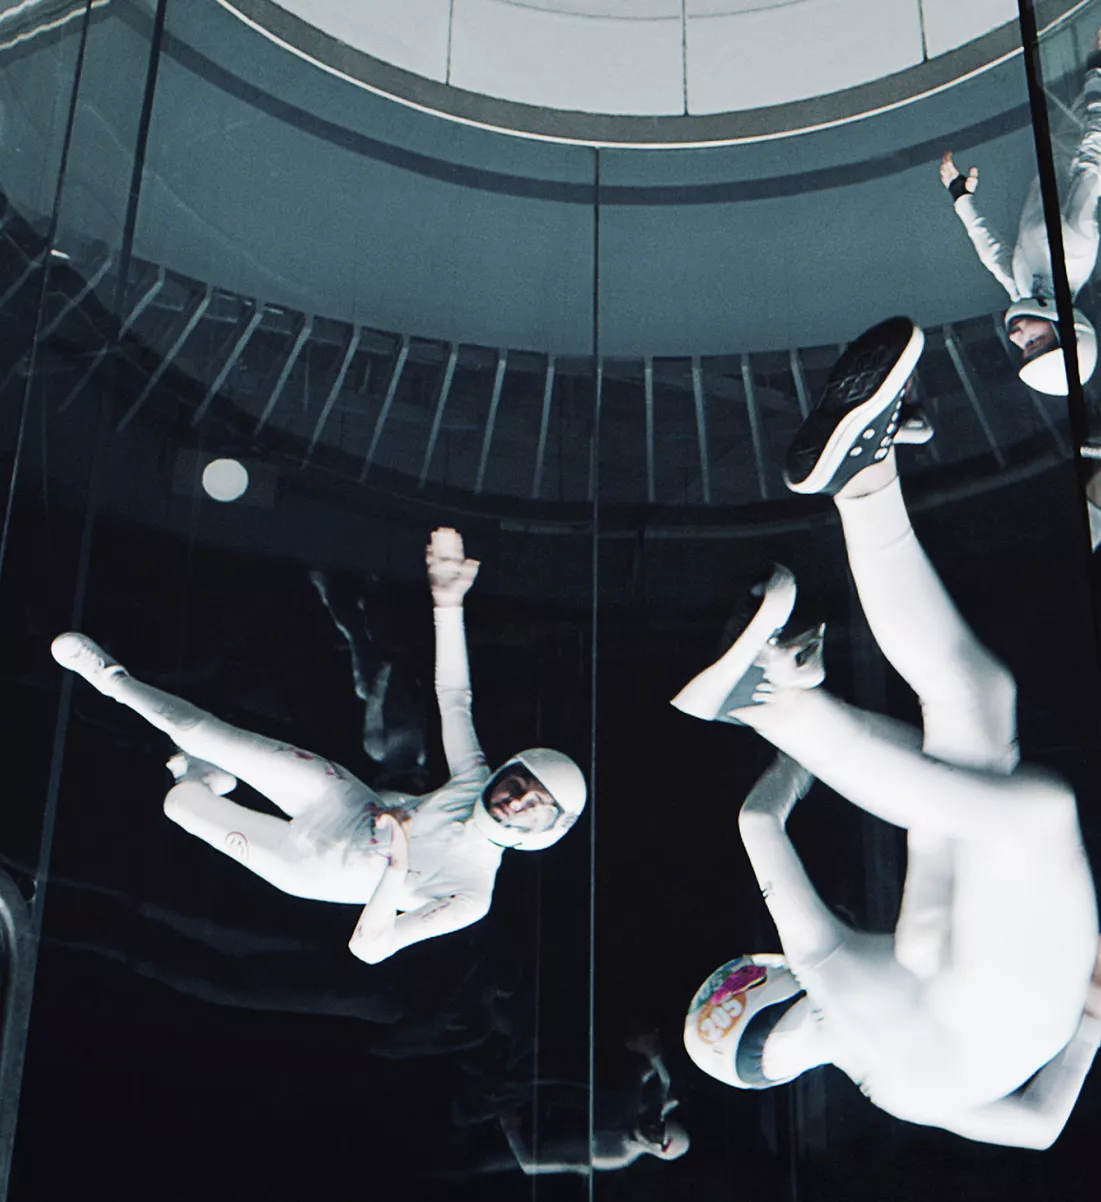 Professional skydivers in tunnel performing